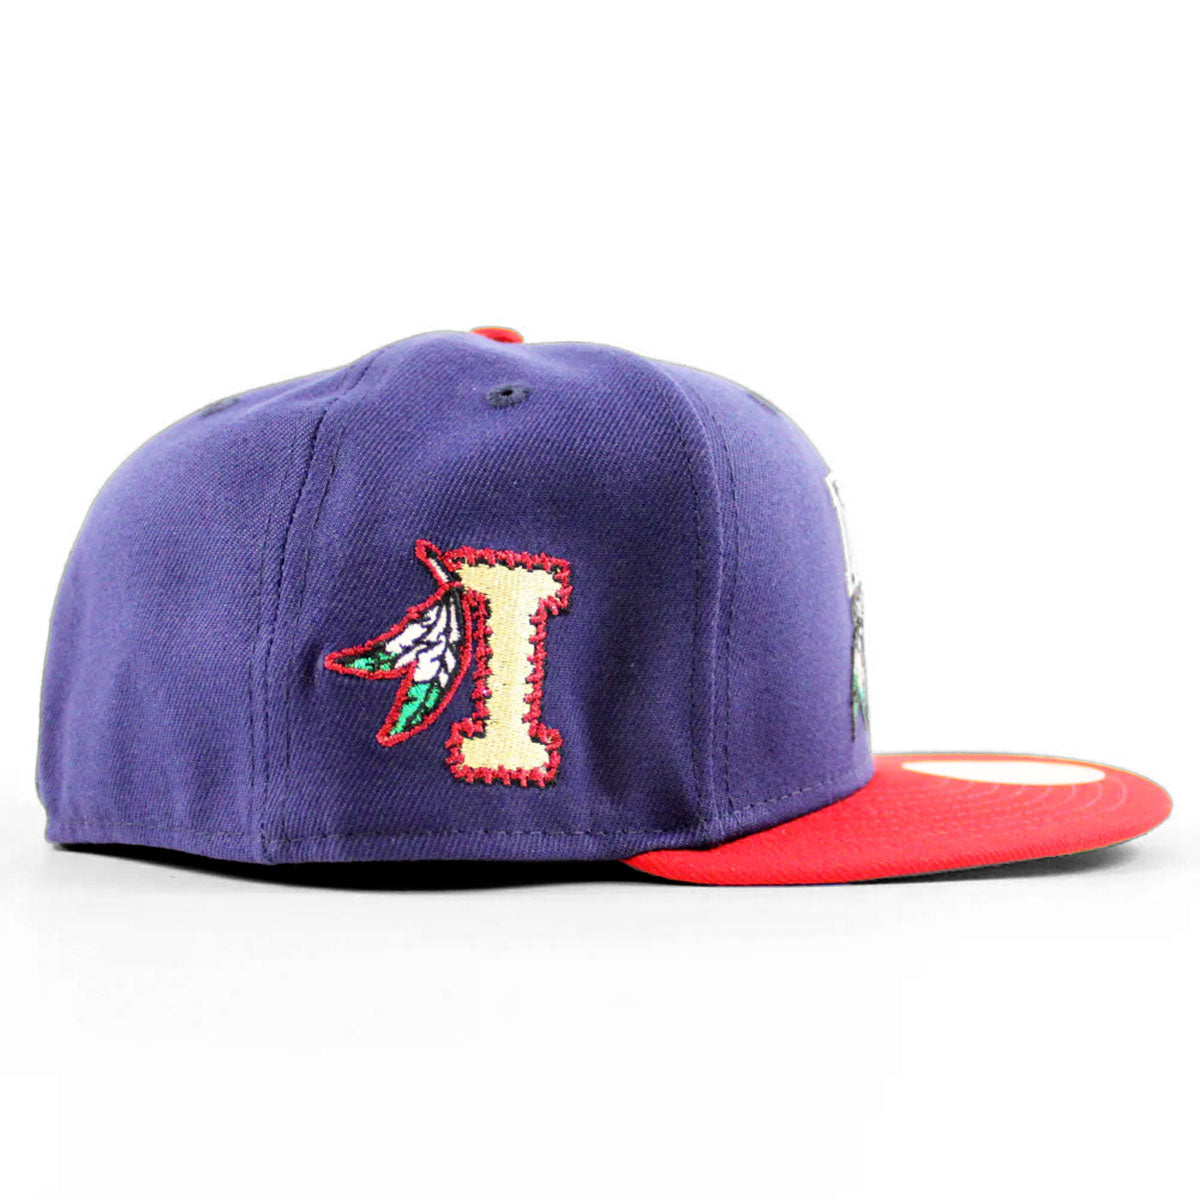 NEW ERA Kinston Indians - 59FIFTY INDIANS PATCH NAVY SCARLET